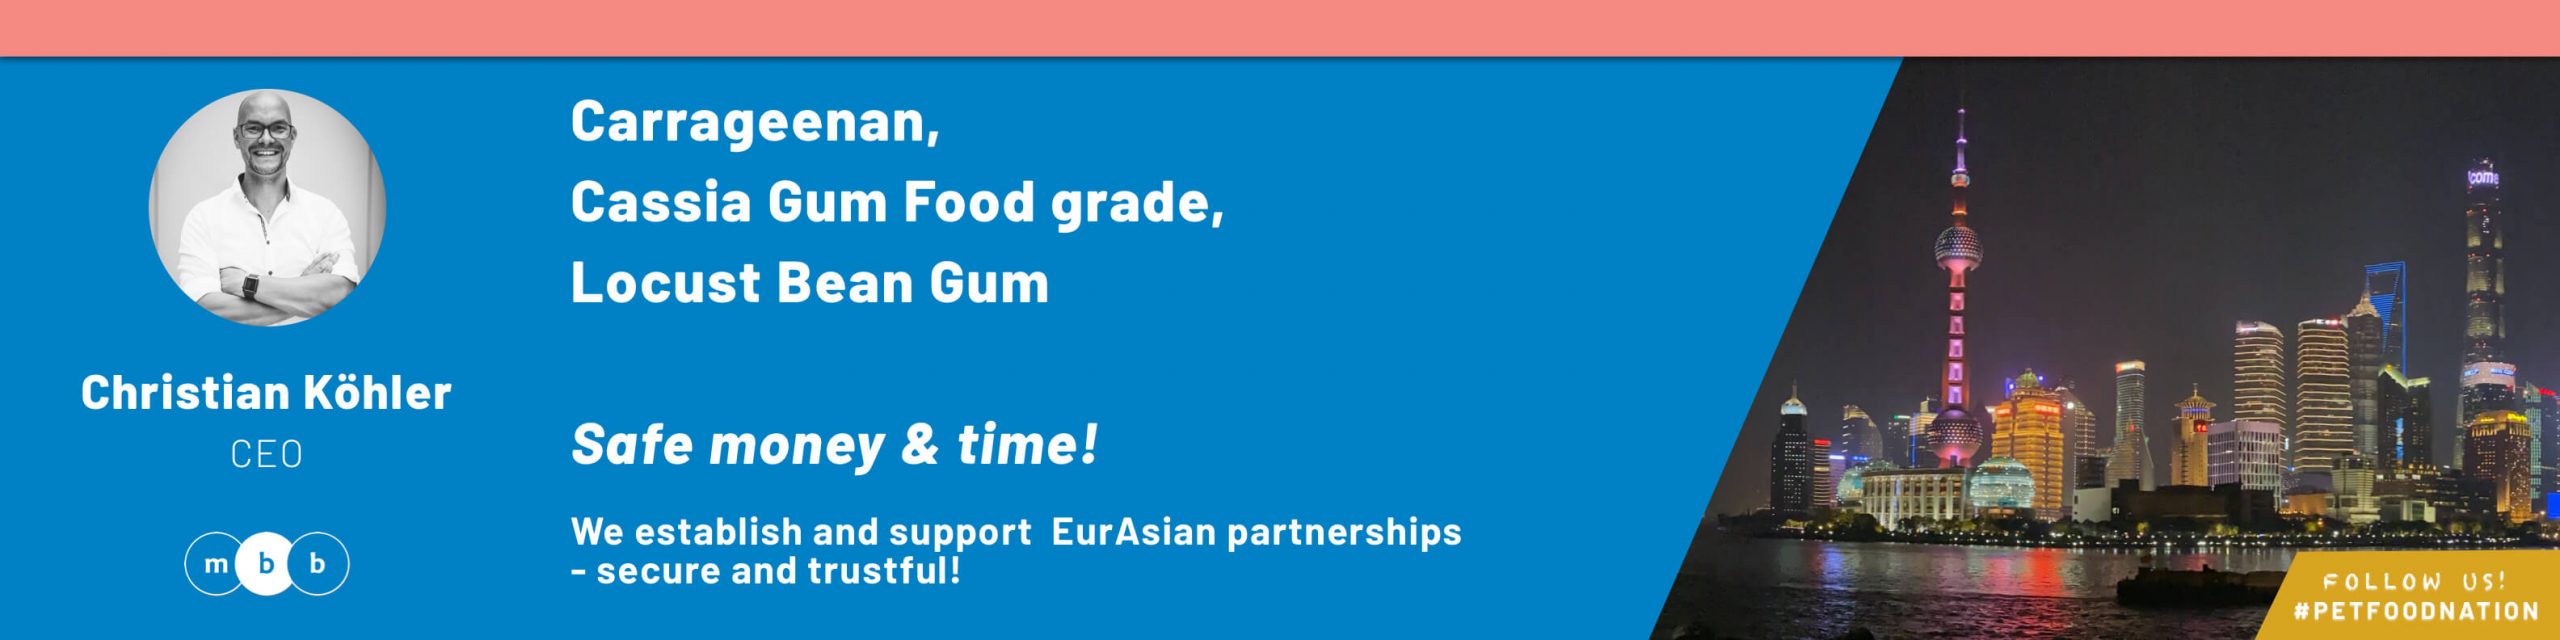 Build EurAsian partnerships ❤️ on people and then on businesses. 💵